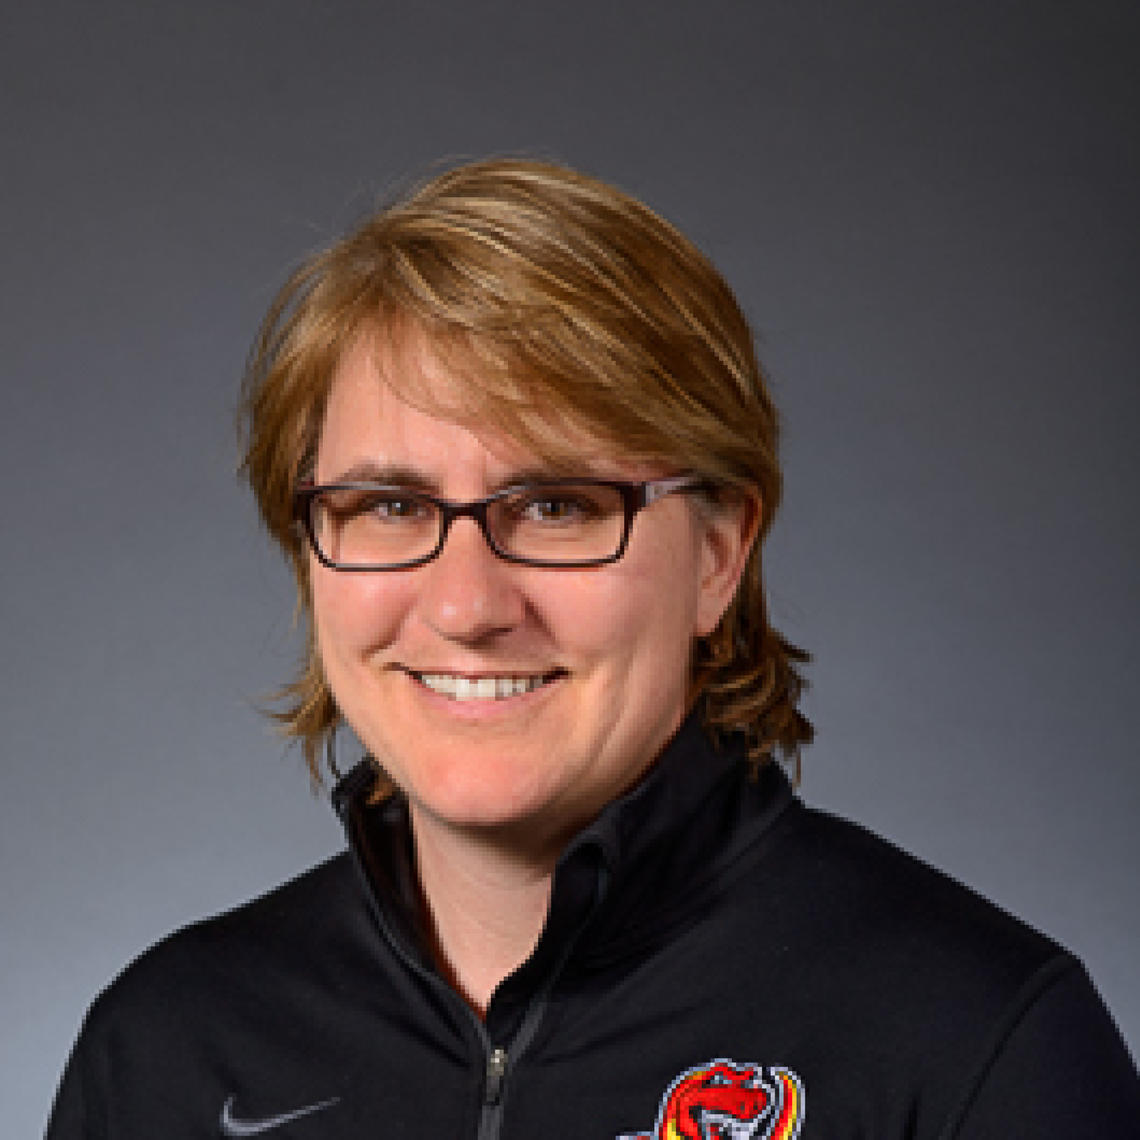 Bonnie Sutter, head athletic therapist at the Sport Medicine Centre at the University of Calgary